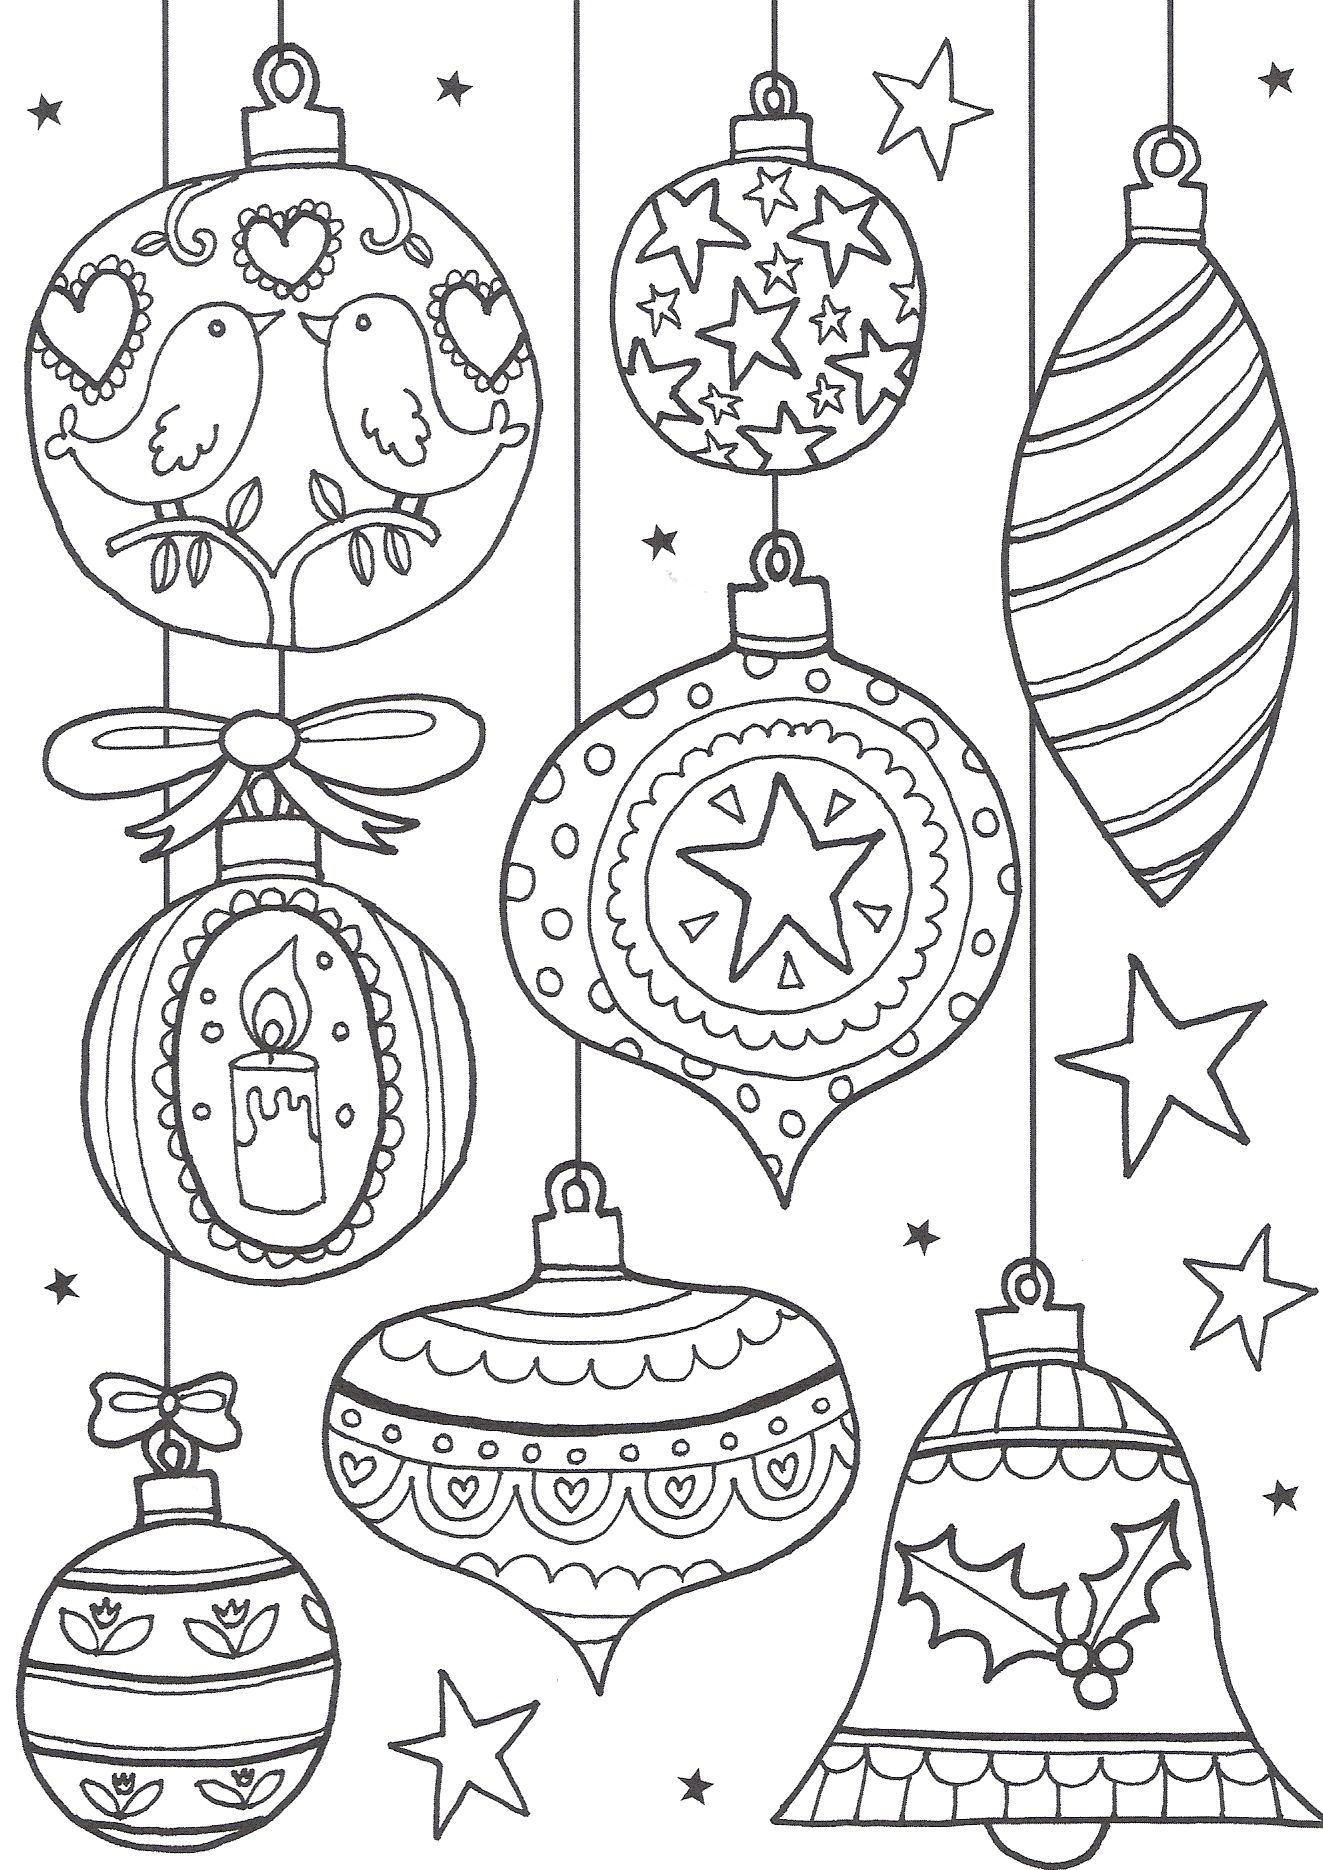 Free Christmas Colouring Pages For Adults – The Ultimate Roundup - Free Printable Christmas Ornaments Stencils